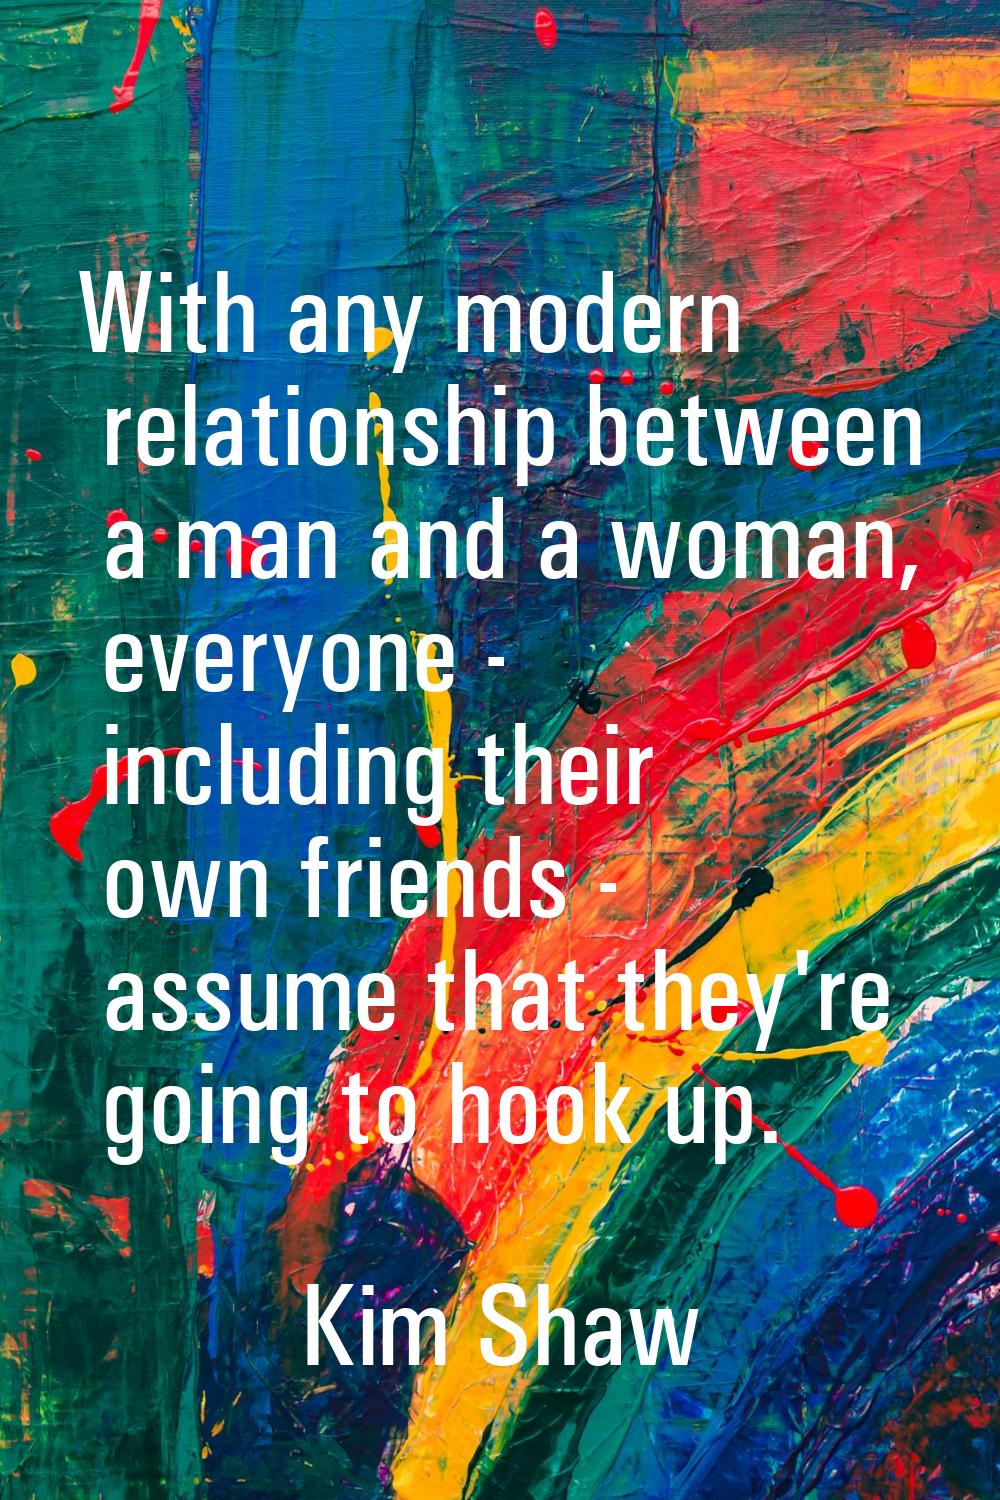 With any modern relationship between a man and a woman, everyone - including their own friends - as